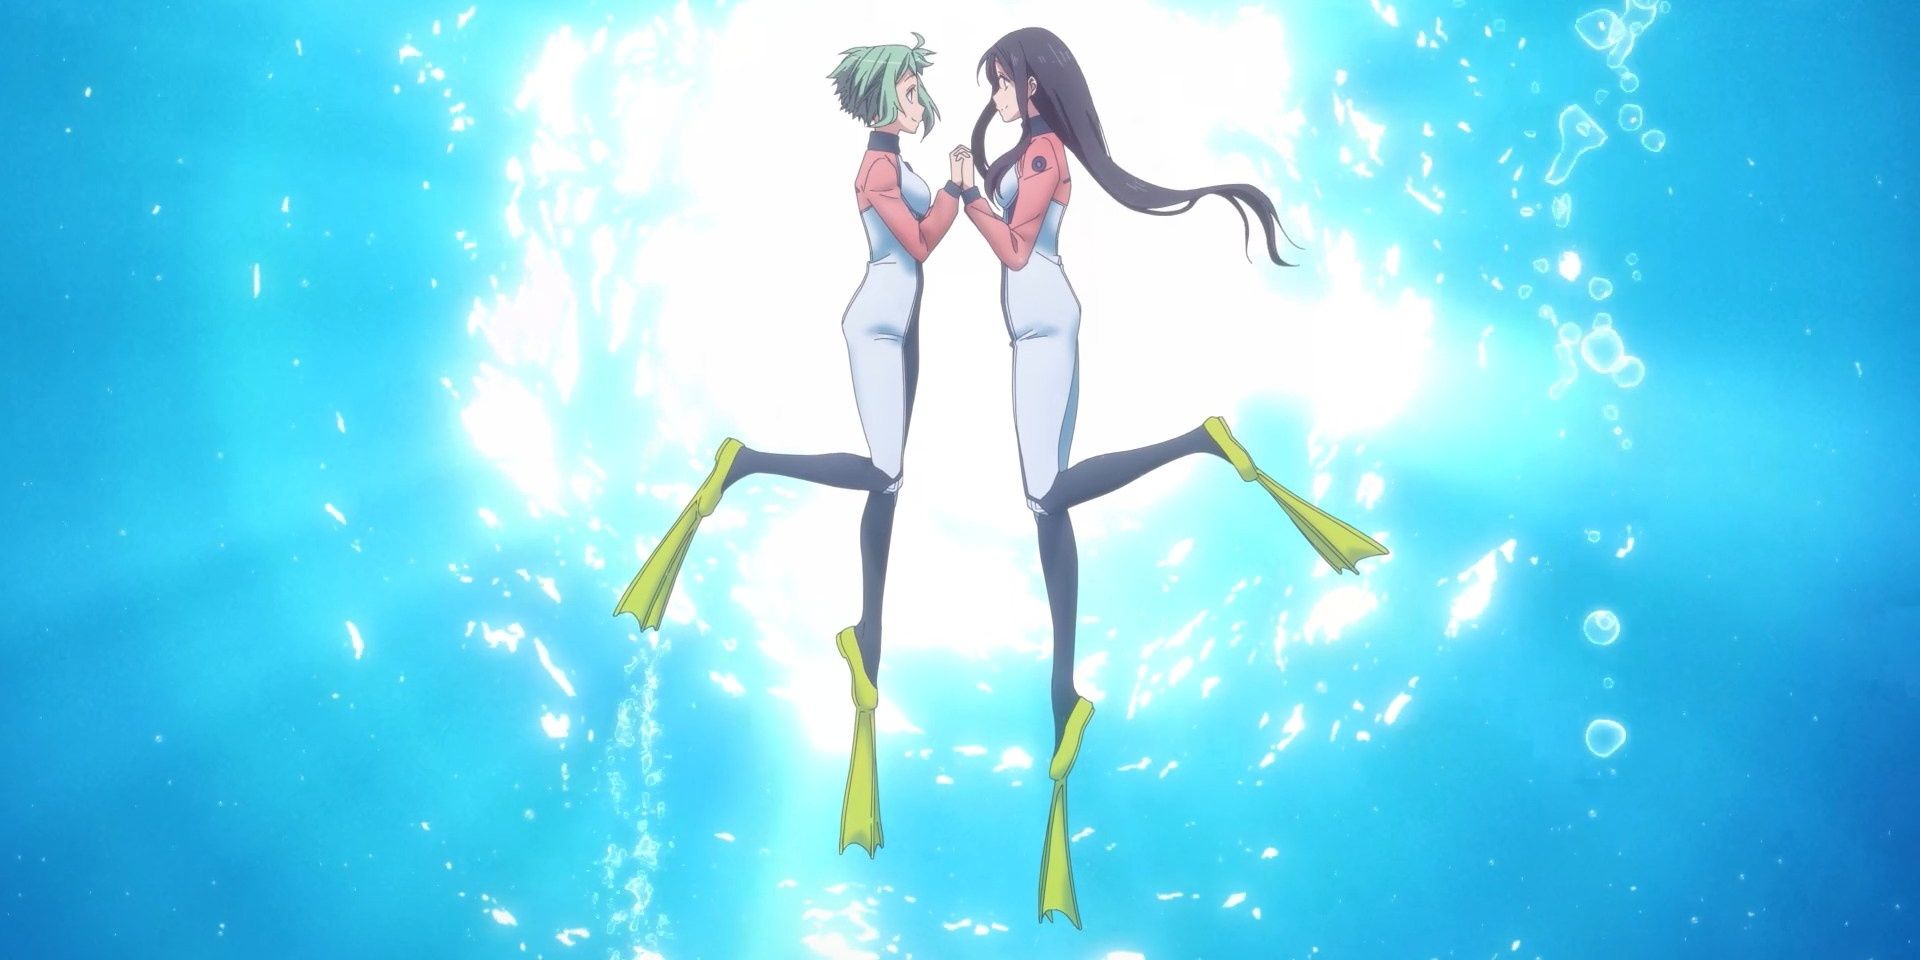 The two main protagonists of Amanchu!